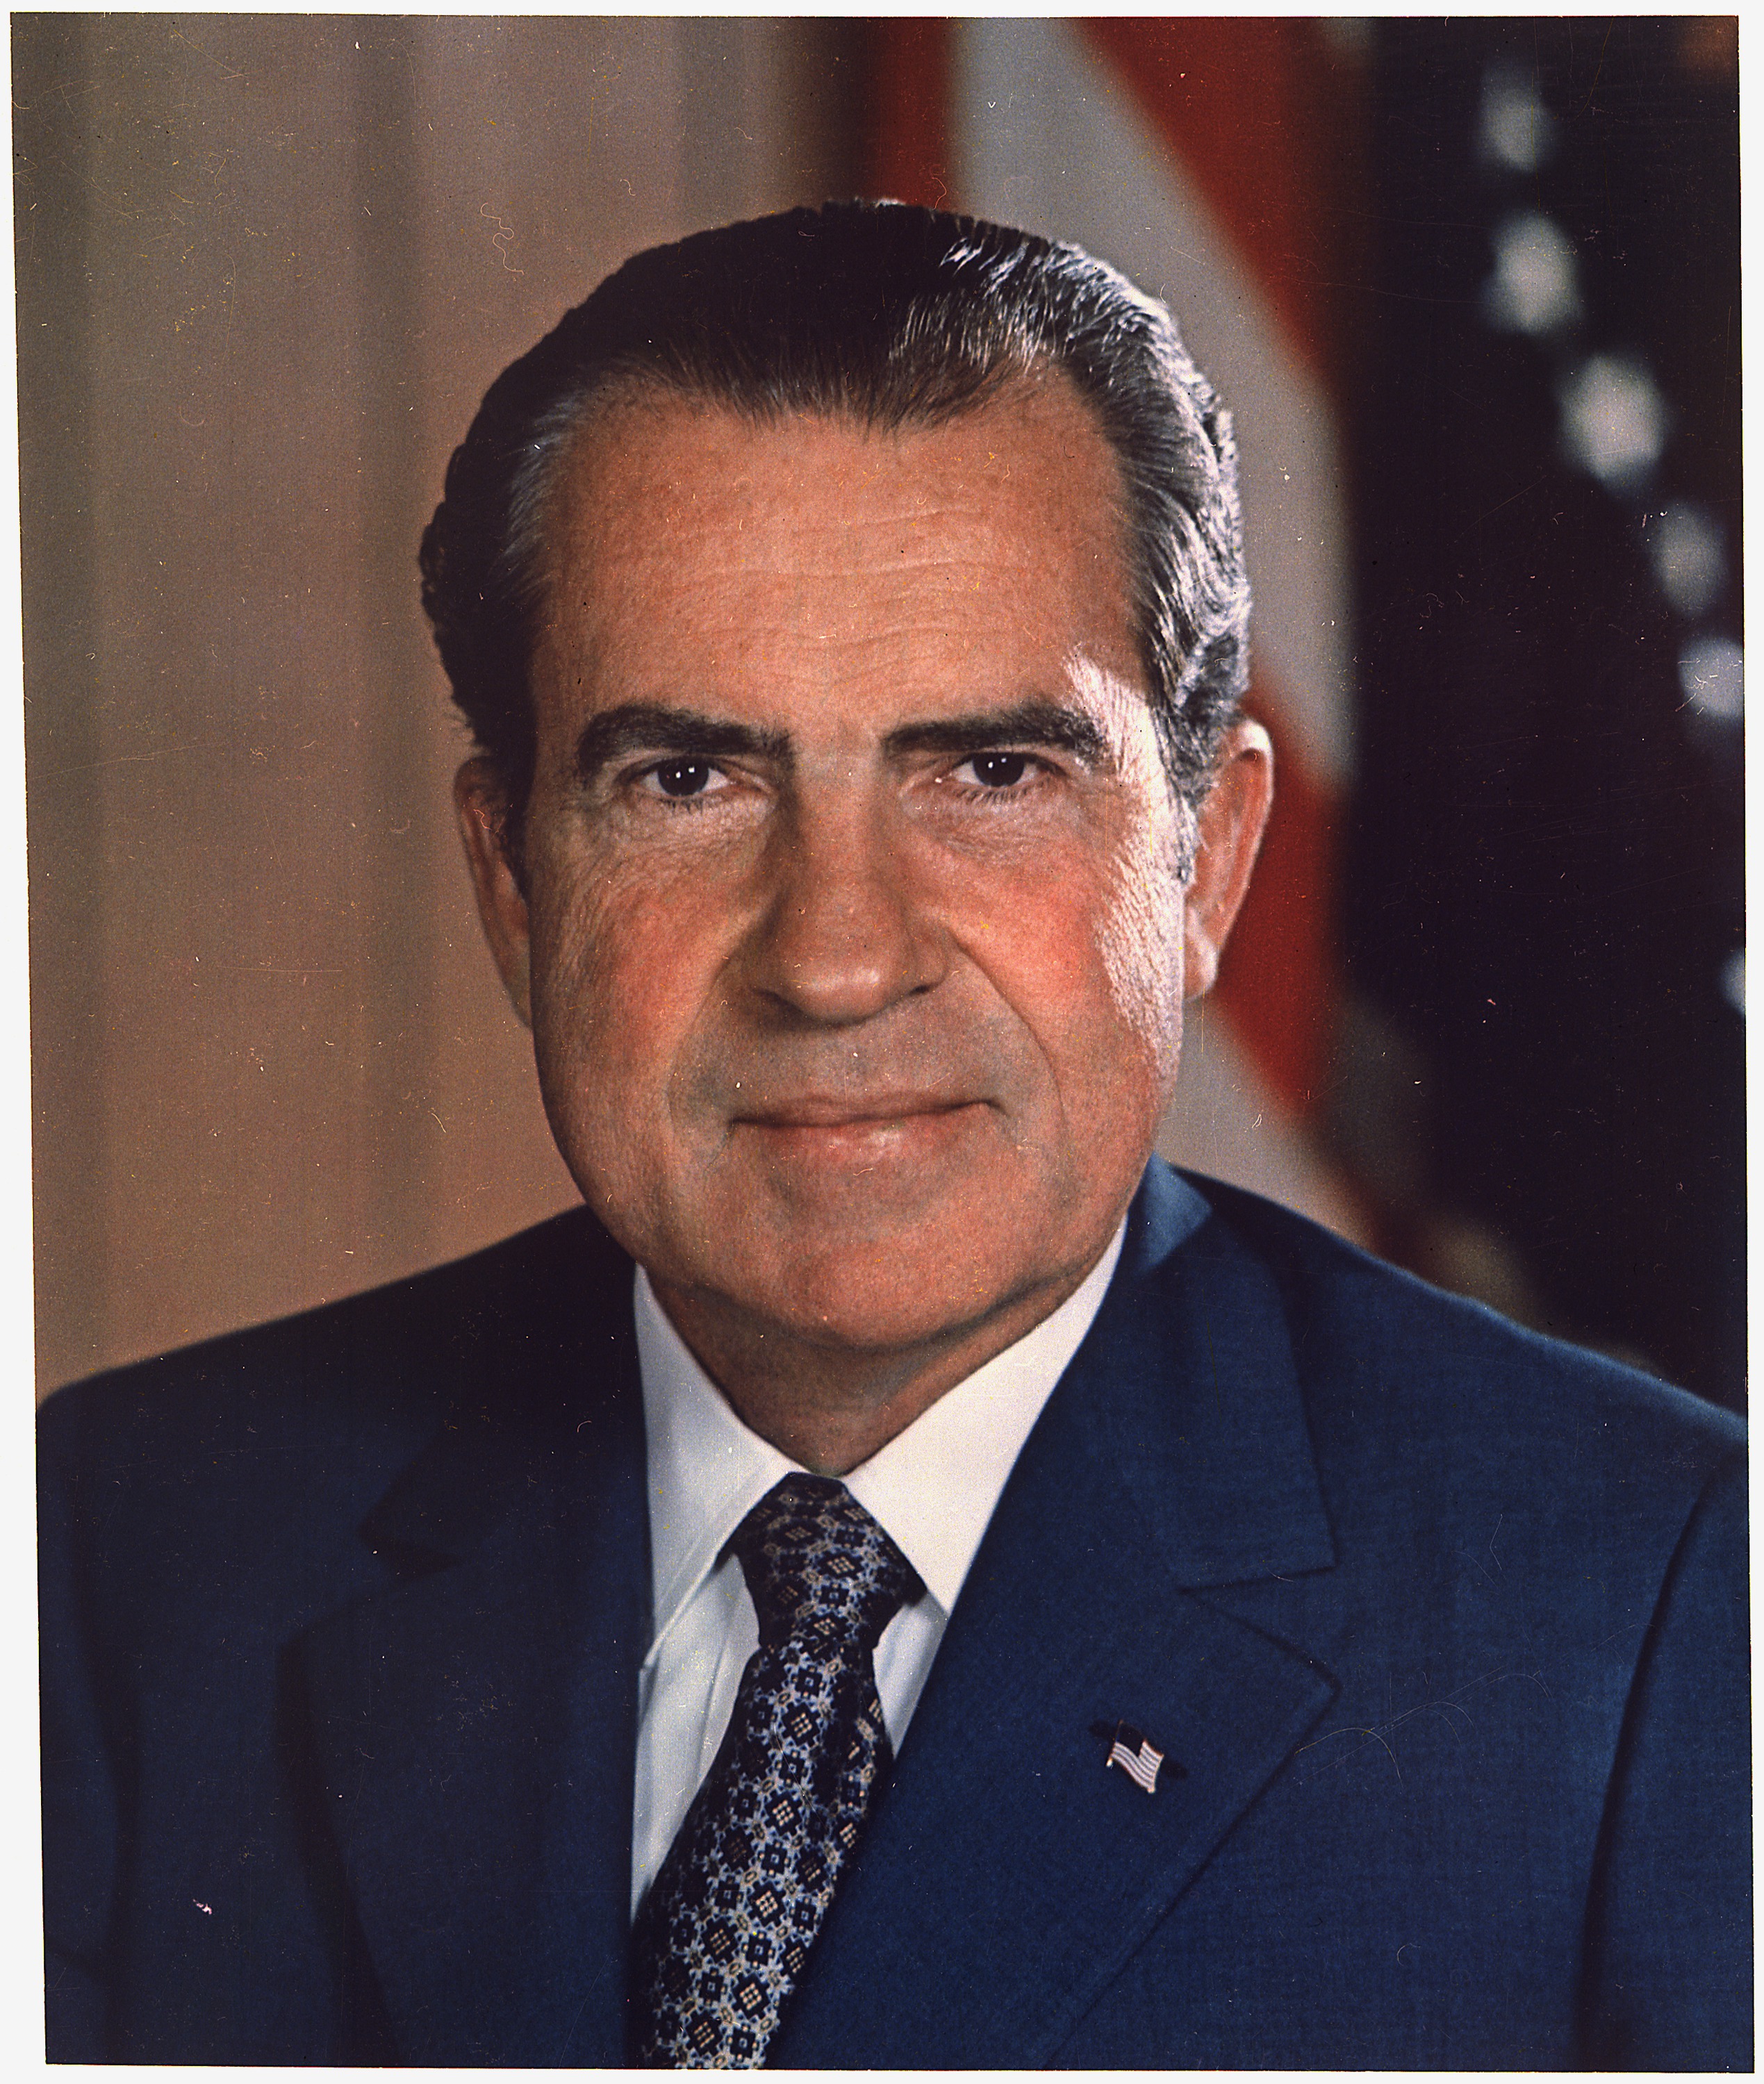 President Richard Nixon declares War on Cancer by introducing the National Cancer Act. He says the following during his 1971 State of the Union."I will also ask for an appropriation of an extra $100 million to launch an intensive campaign to find a cure for cancer, and I will ask later for whatever additional funds can effectively be used. The time has come in America when the same kind of concentrated effort that split the atom and took man to the moon should be turned toward conquering this dread disease. Let us make a total national commitment to achieve this goal."12  1Rettig, Richard. Cancer Crusade: The Story of the National Cancer Act of 1971. iUniverse, 2005                                2National Cancer Institute. The National Cancer Act of 1971. www.cancer.gov/aboutnci/national-cancer-act-1971/allpages            